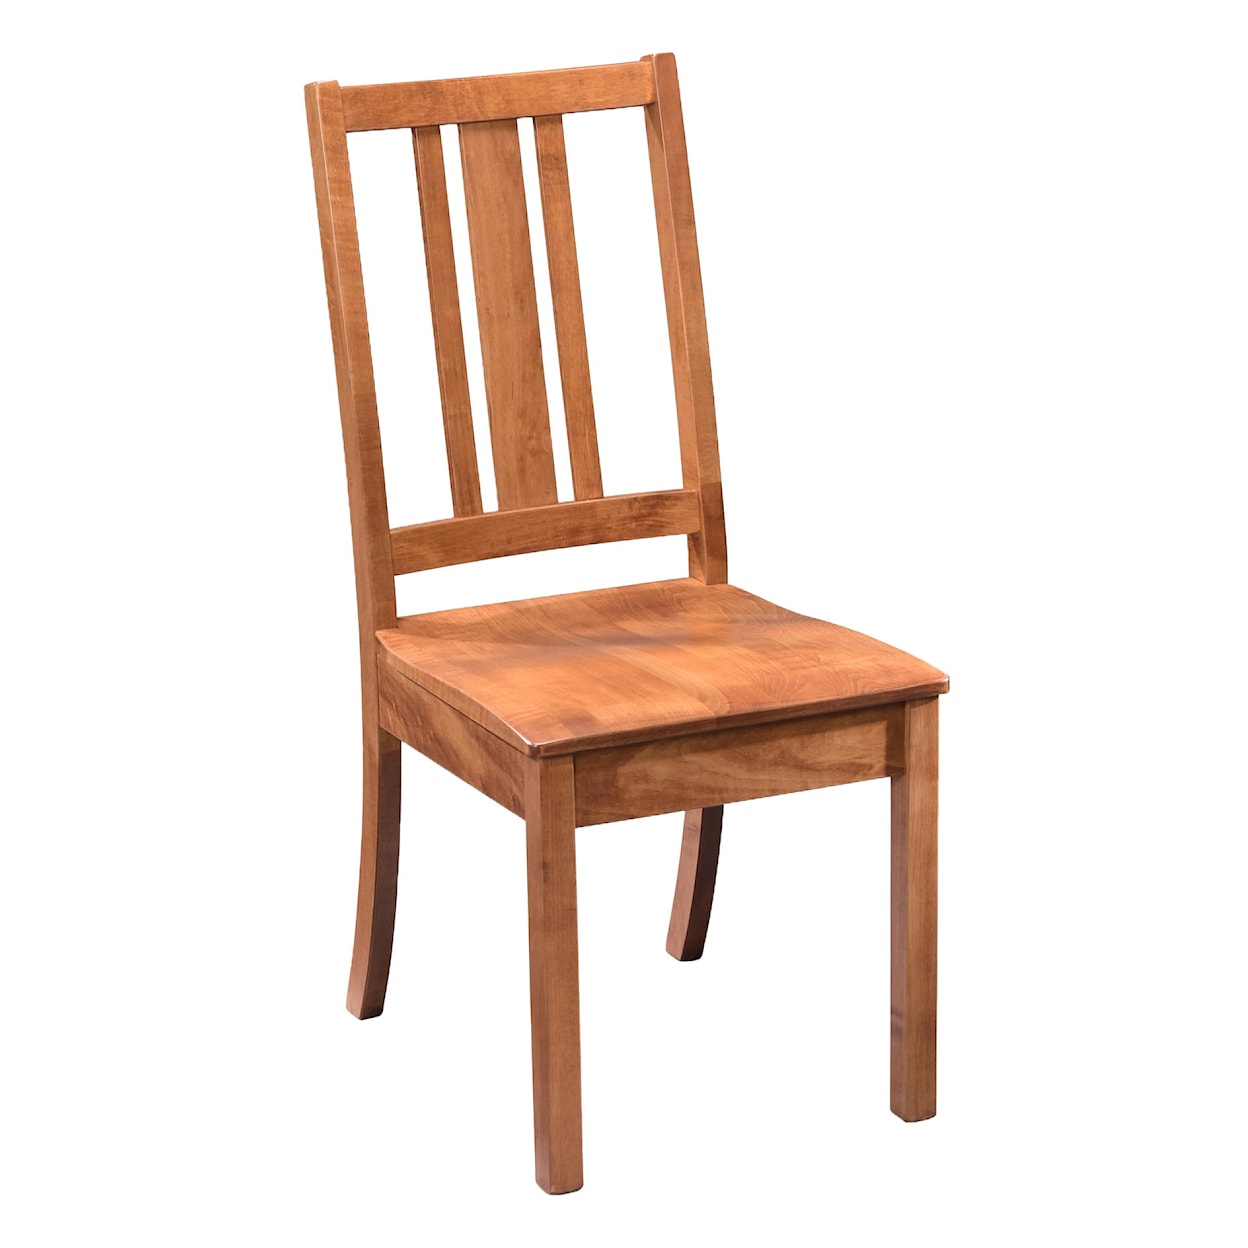 Archbold Furniture Amish Essentials Casual Dining Bradley Dining Side Chair